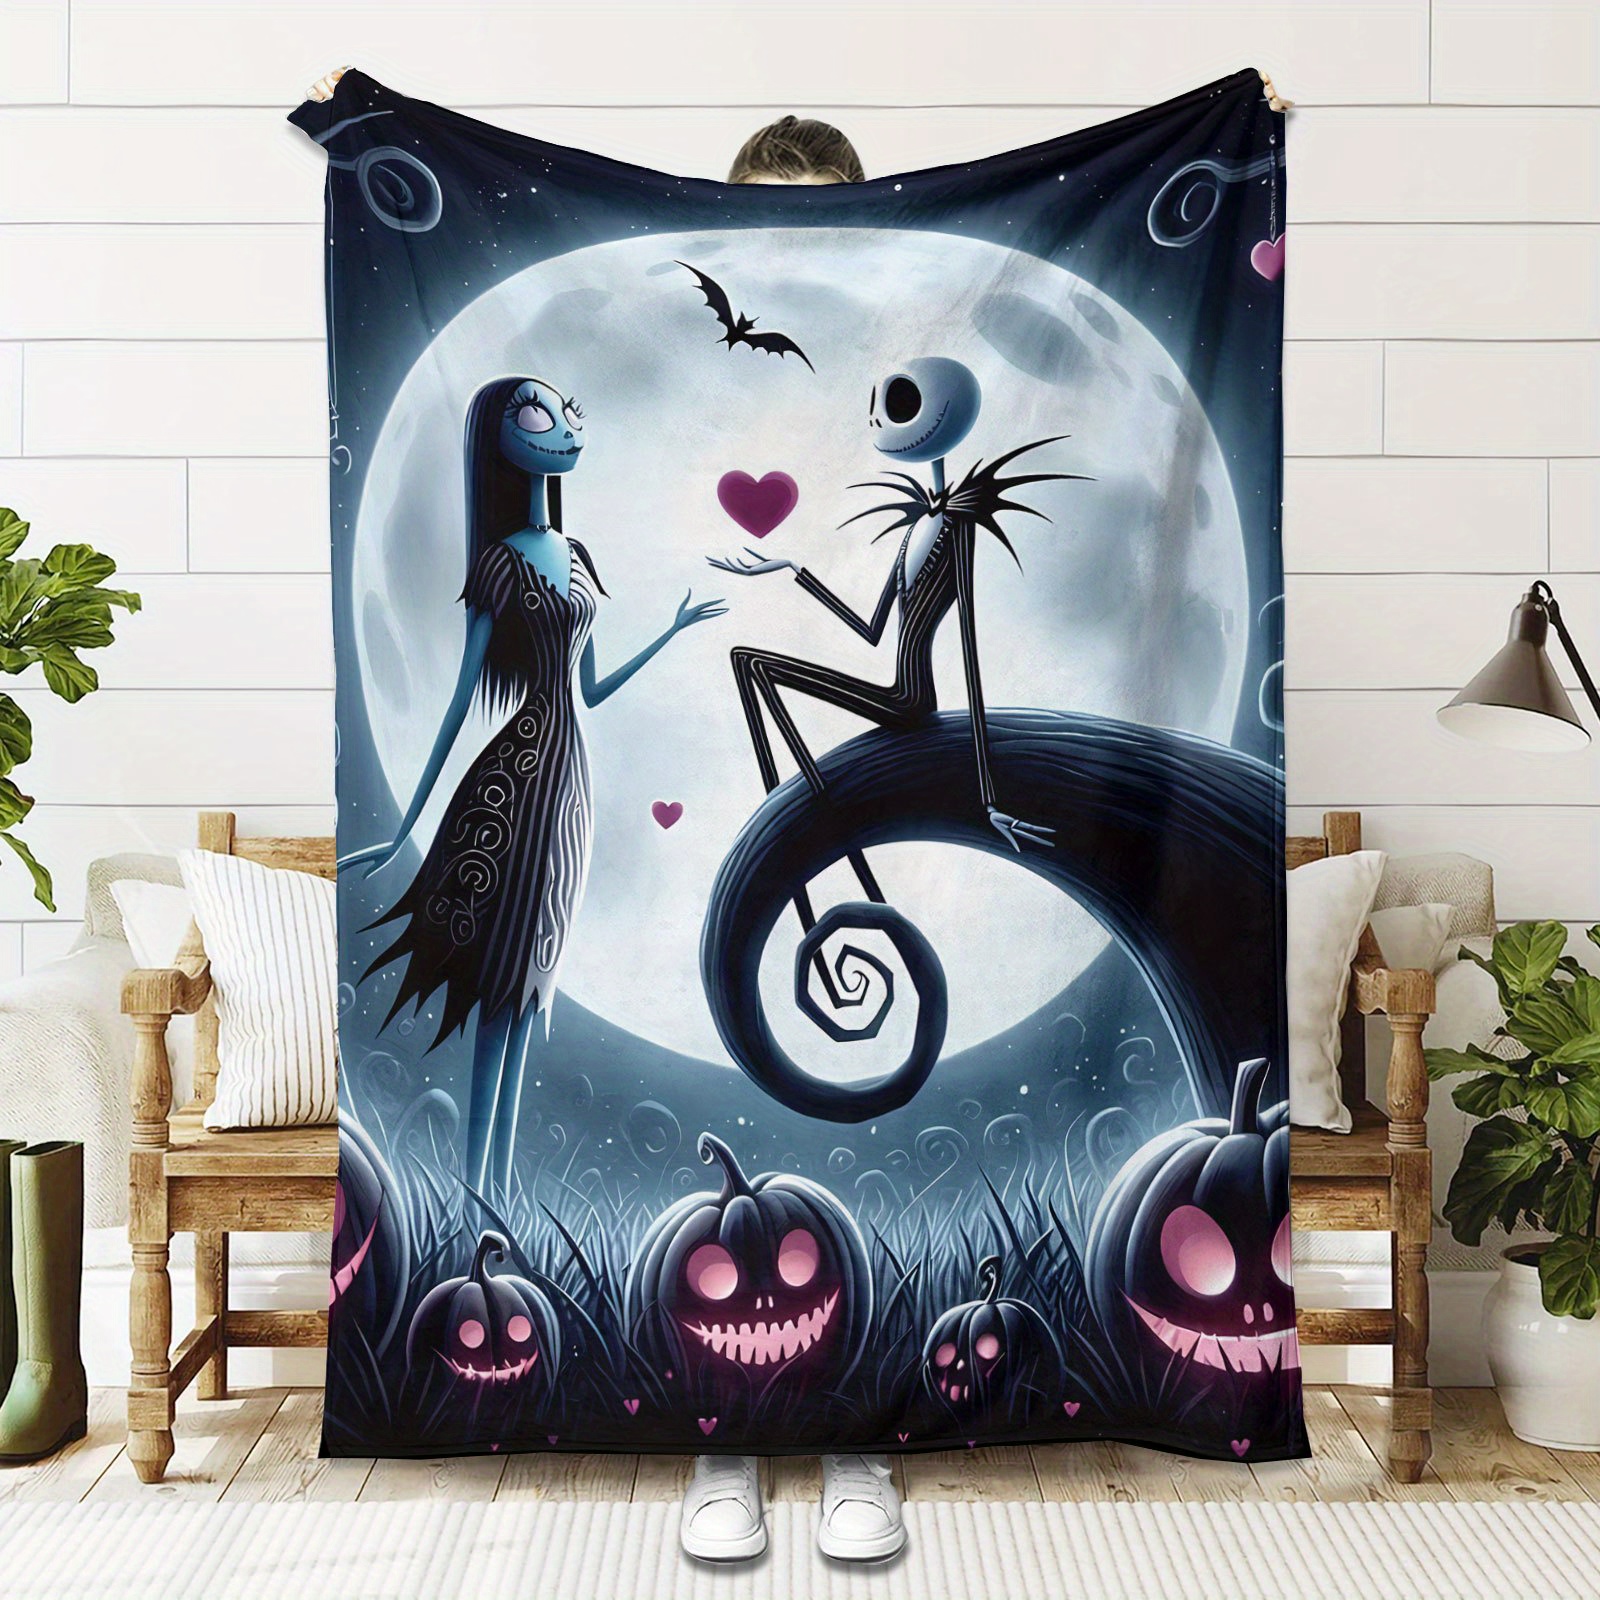 

Ume Digital Printed & Polyester Flannel Throw Blanket - Contemporary Cartoon Theme, Tear Resistant Lightweight All-season Throws For Couch, Bed, Travel - Woven Soft Cozy Home Decor